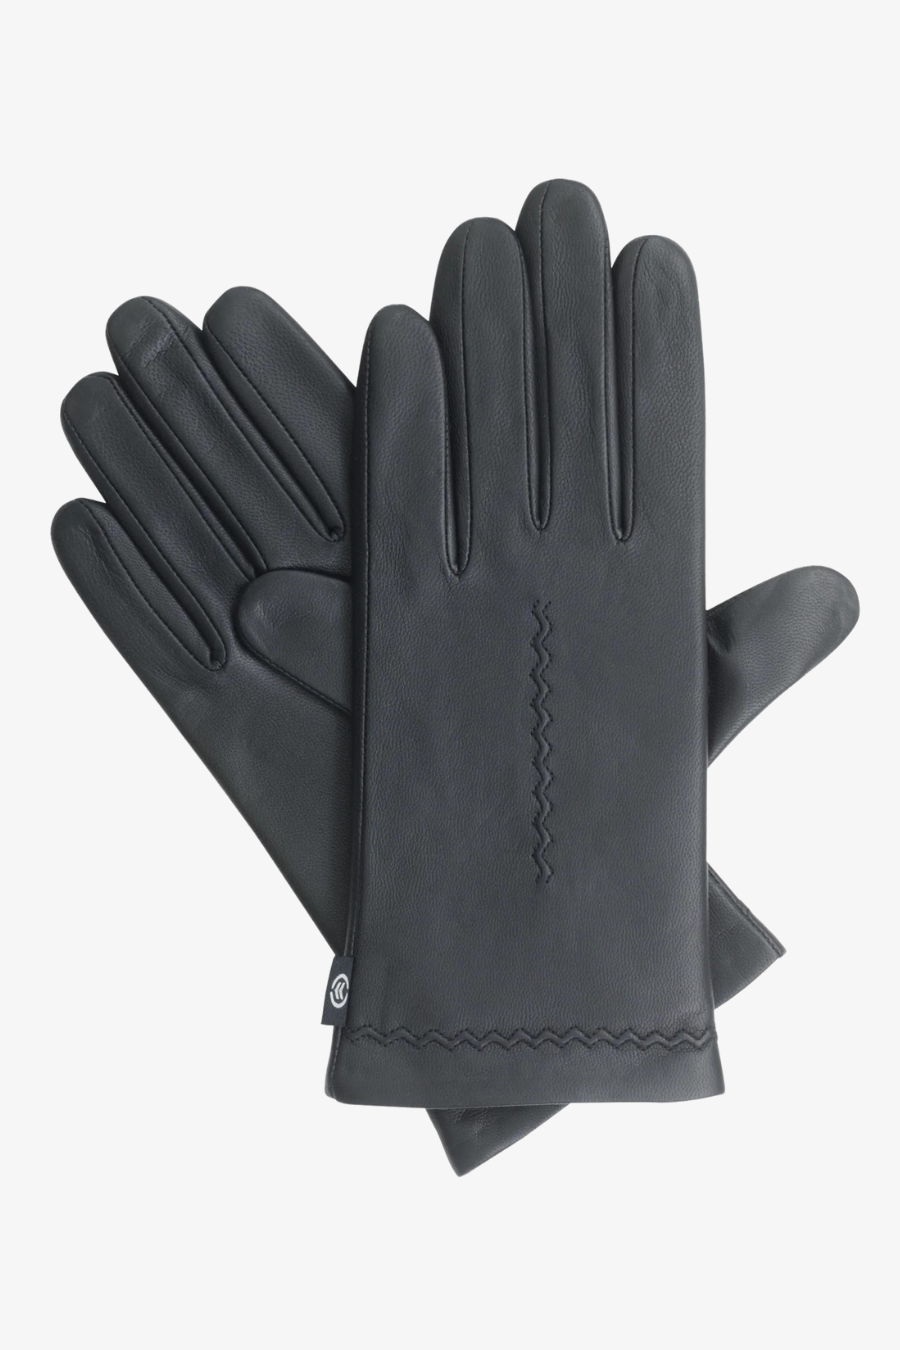 glove1.png